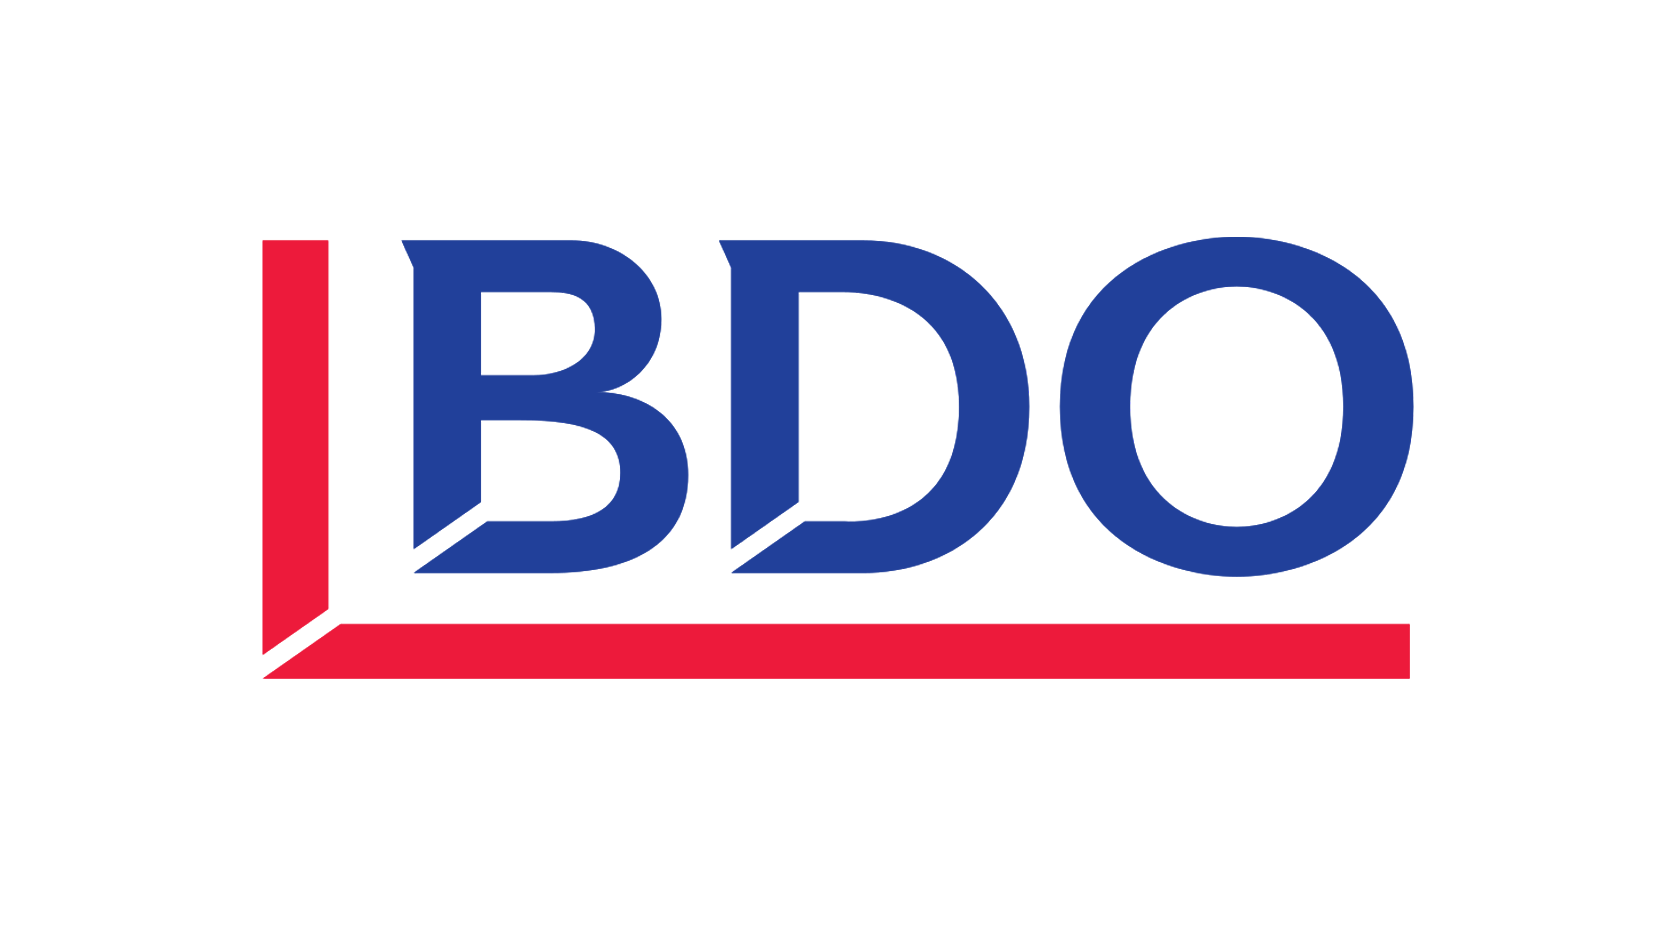 From BDO to LBDO: The Importance of Clear Branding